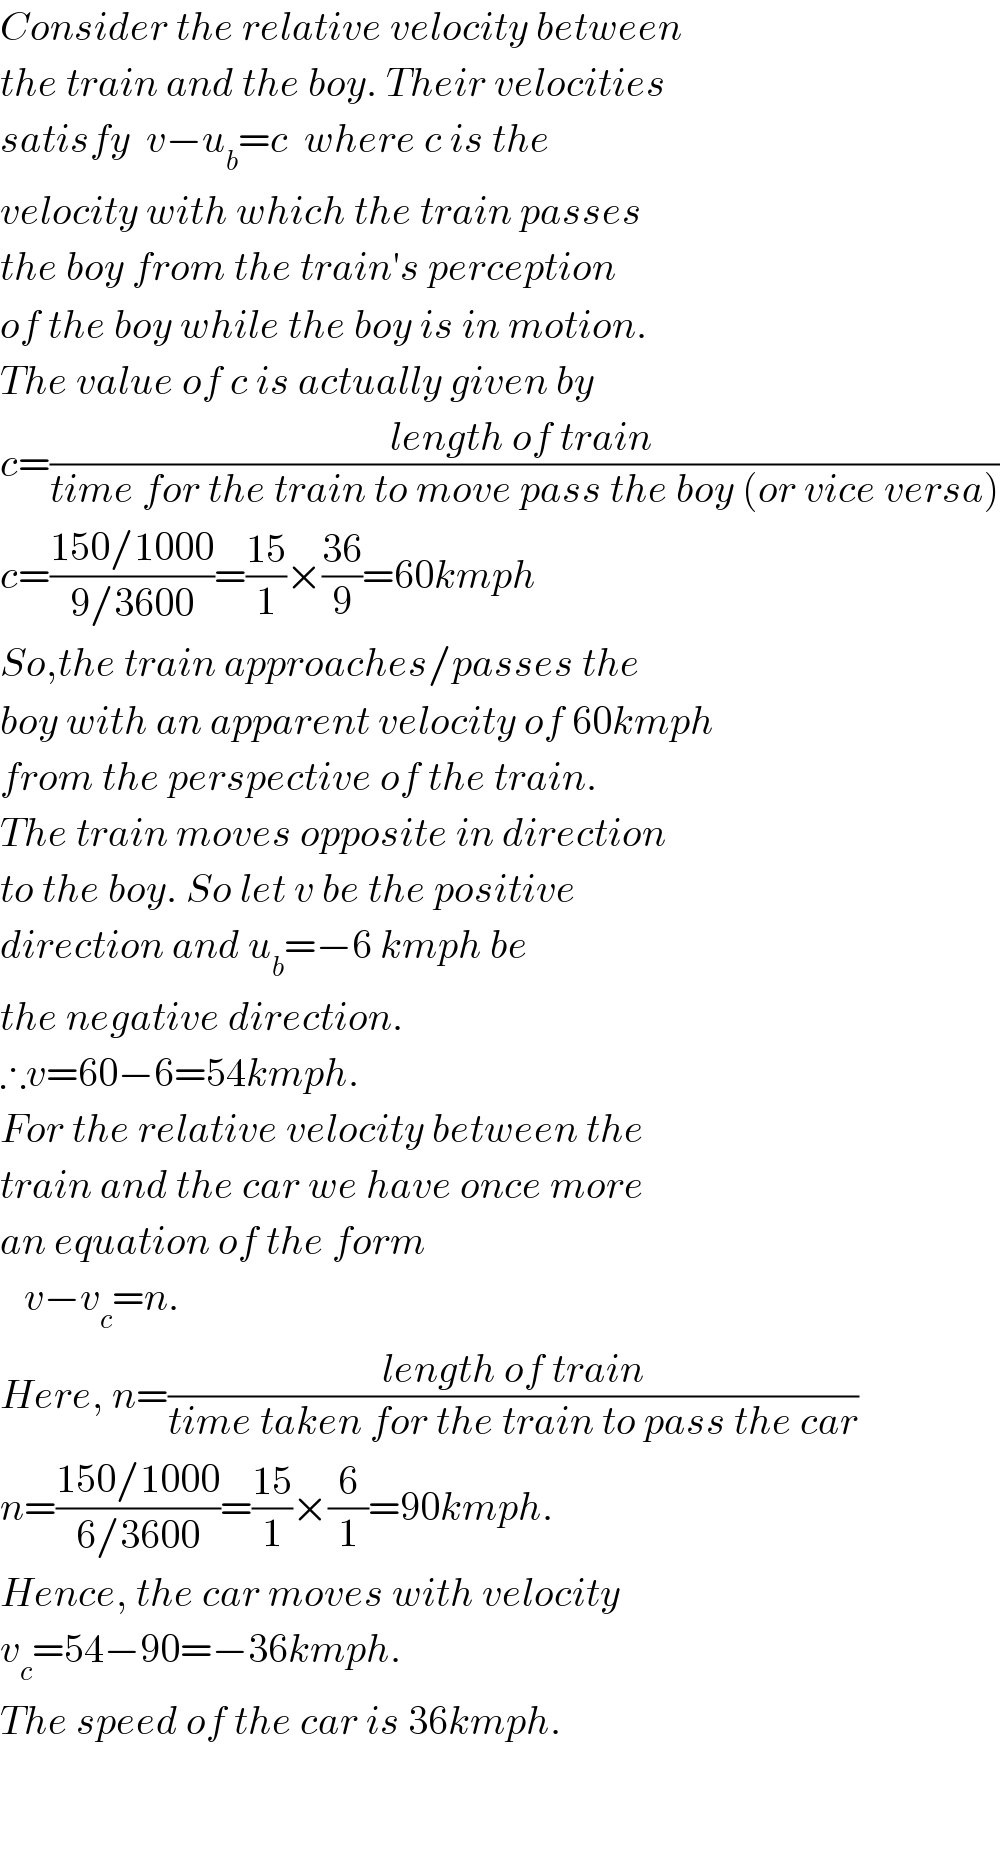 Consider the relative velocity between  the train and the boy. Their velocities  satisfy  v−u_b =c  where c is the   velocity with which the train passes  the boy from the train′s perception  of the boy while the boy is in motion.  The value of c is actually given by  c=((length of train )/(time for the train to move pass the boy (or vice versa)))  c=((150/1000)/(9/3600))=((15)/1)×((36)/9)=60kmph  So,the train approaches/passes the  boy with an apparent velocity of 60kmph  from the perspective of the train.  The train moves opposite in direction  to the boy. So let v be the positive  direction and u_b =−6 kmph be  the negative direction.  ∴v=60−6=54kmph.  For the relative velocity between the  train and the car we have once more  an equation of the form     v−v_c =n.  Here, n=((length of train)/(time taken for the train to pass the car))  n=((150/1000)/(6/3600))=((15)/1)×(6/1)=90kmph.  Hence, the car moves with velocity  v_c =54−90=−36kmph.  The speed of the car is 36kmph.      